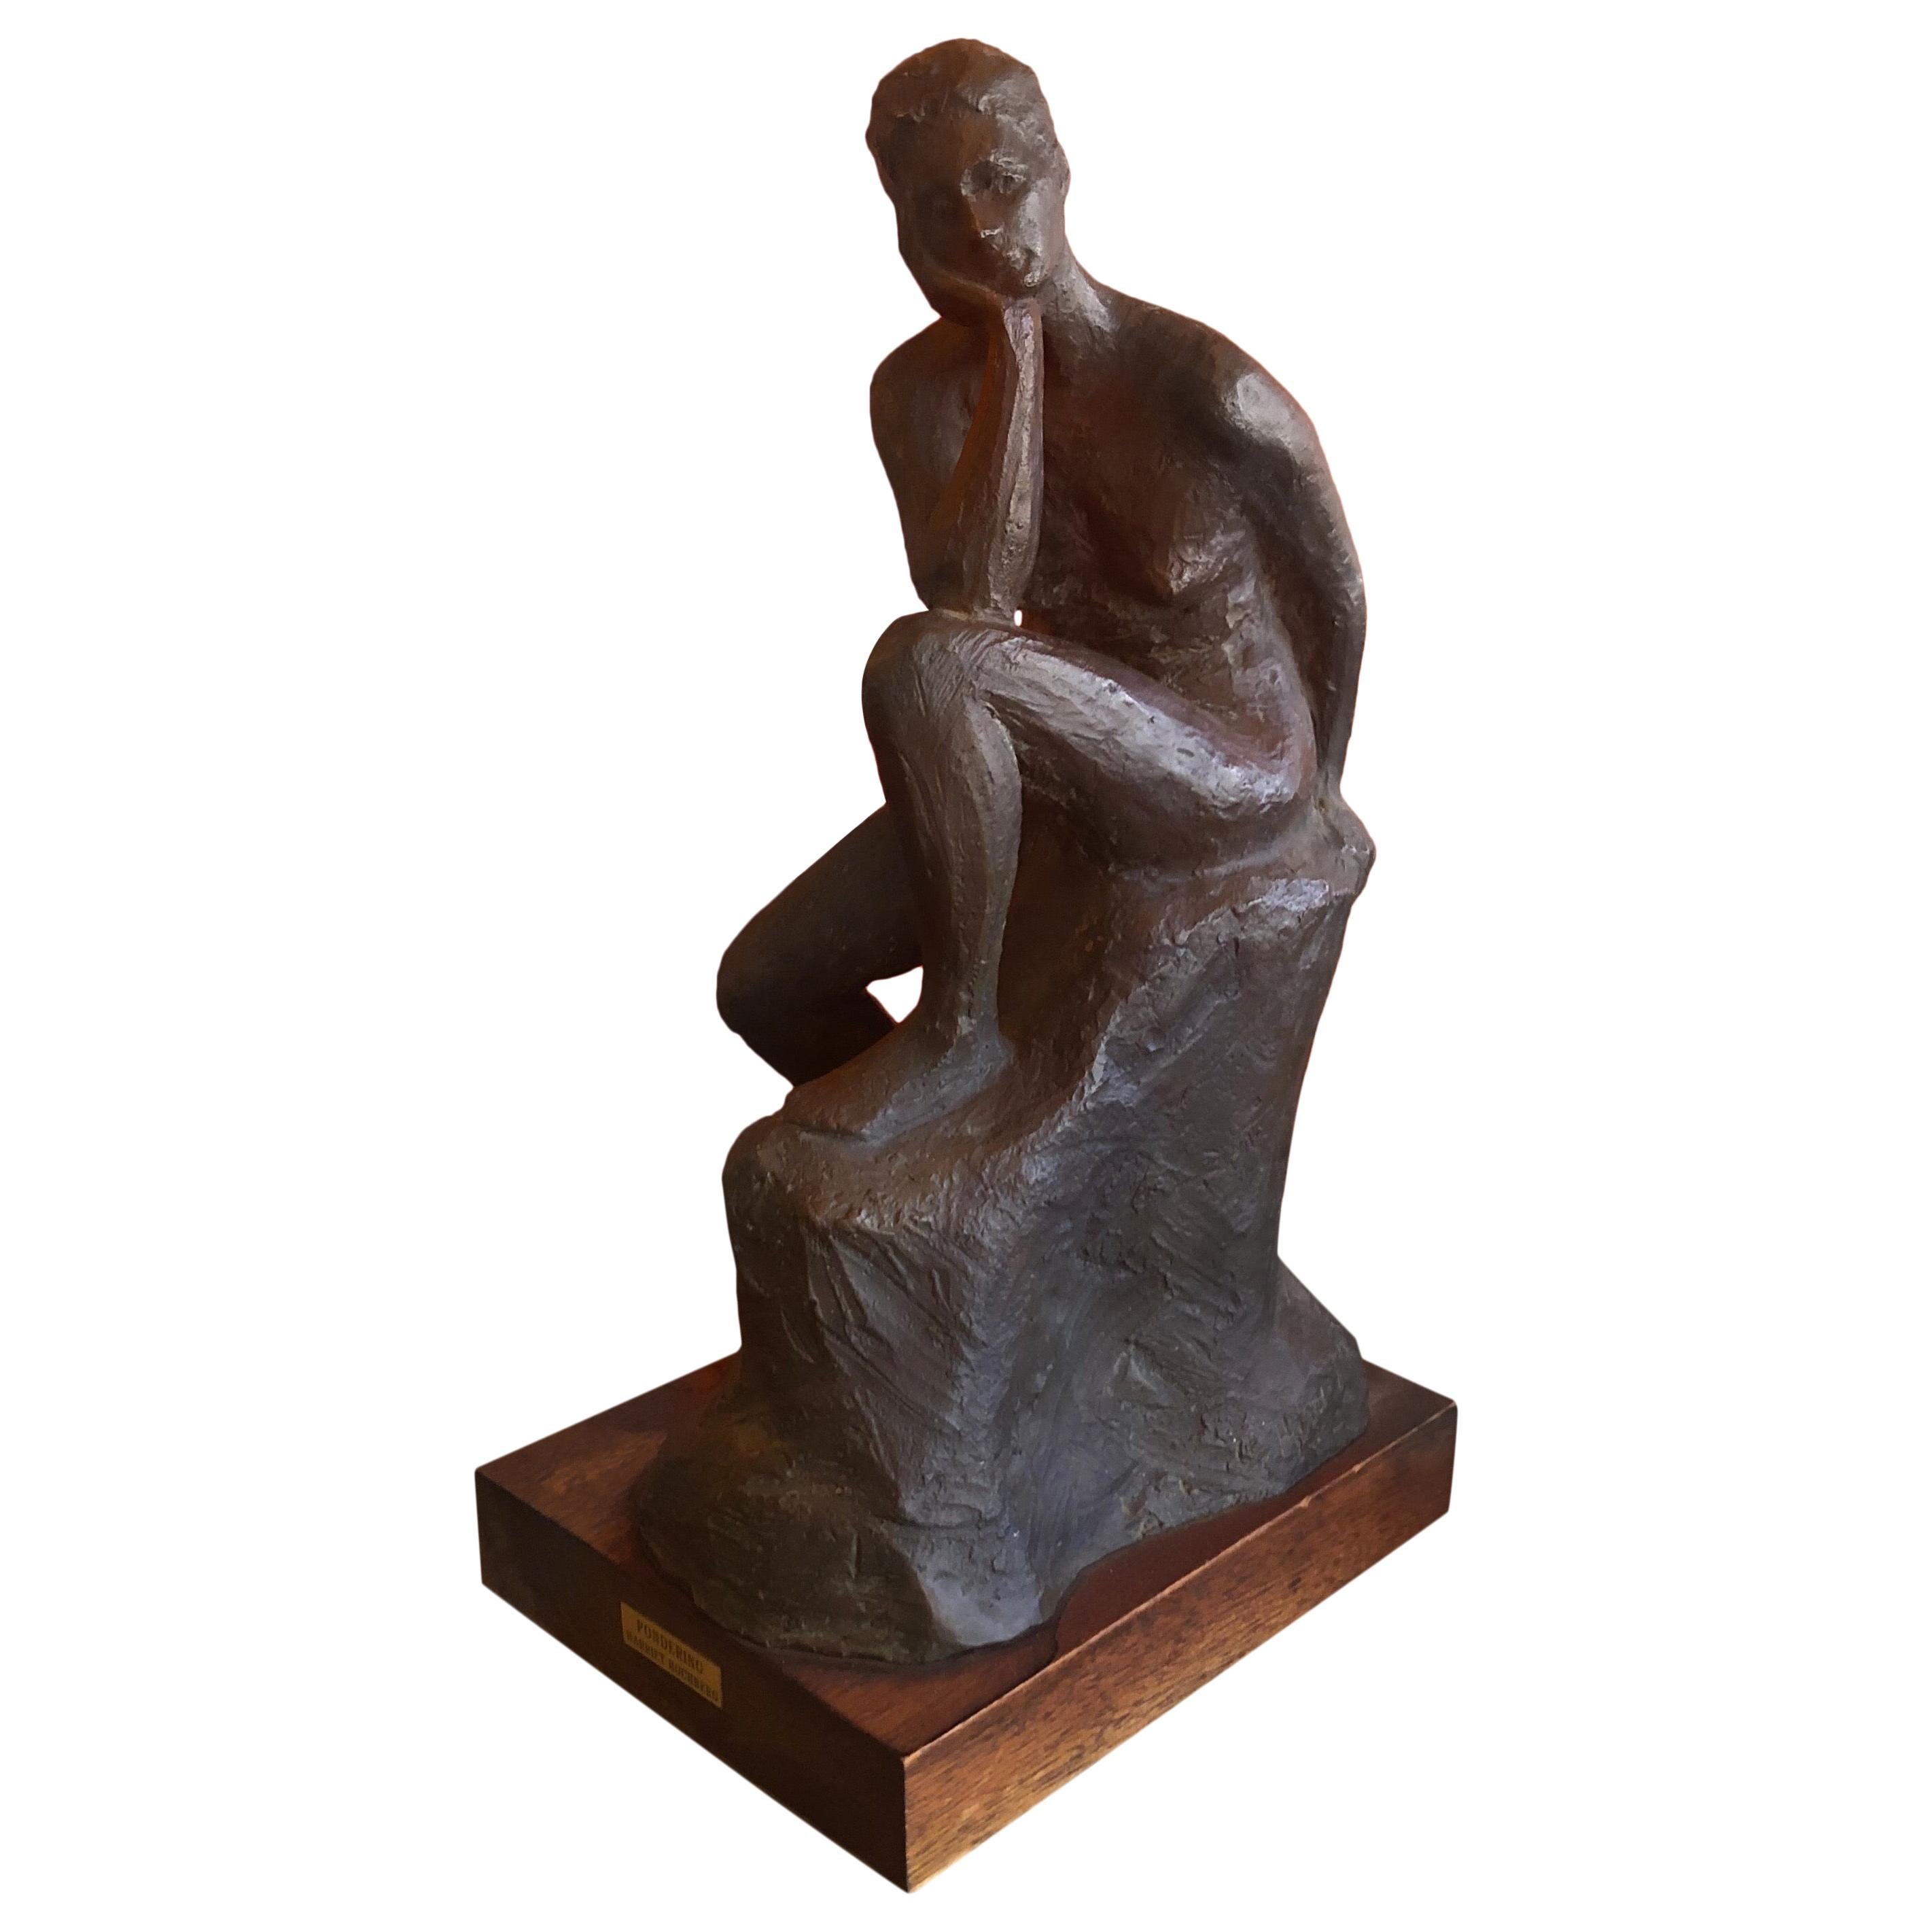 Midcentury Figurative Woman in Bronze Entitled "Pondering" by Harriet Hochberg For Sale